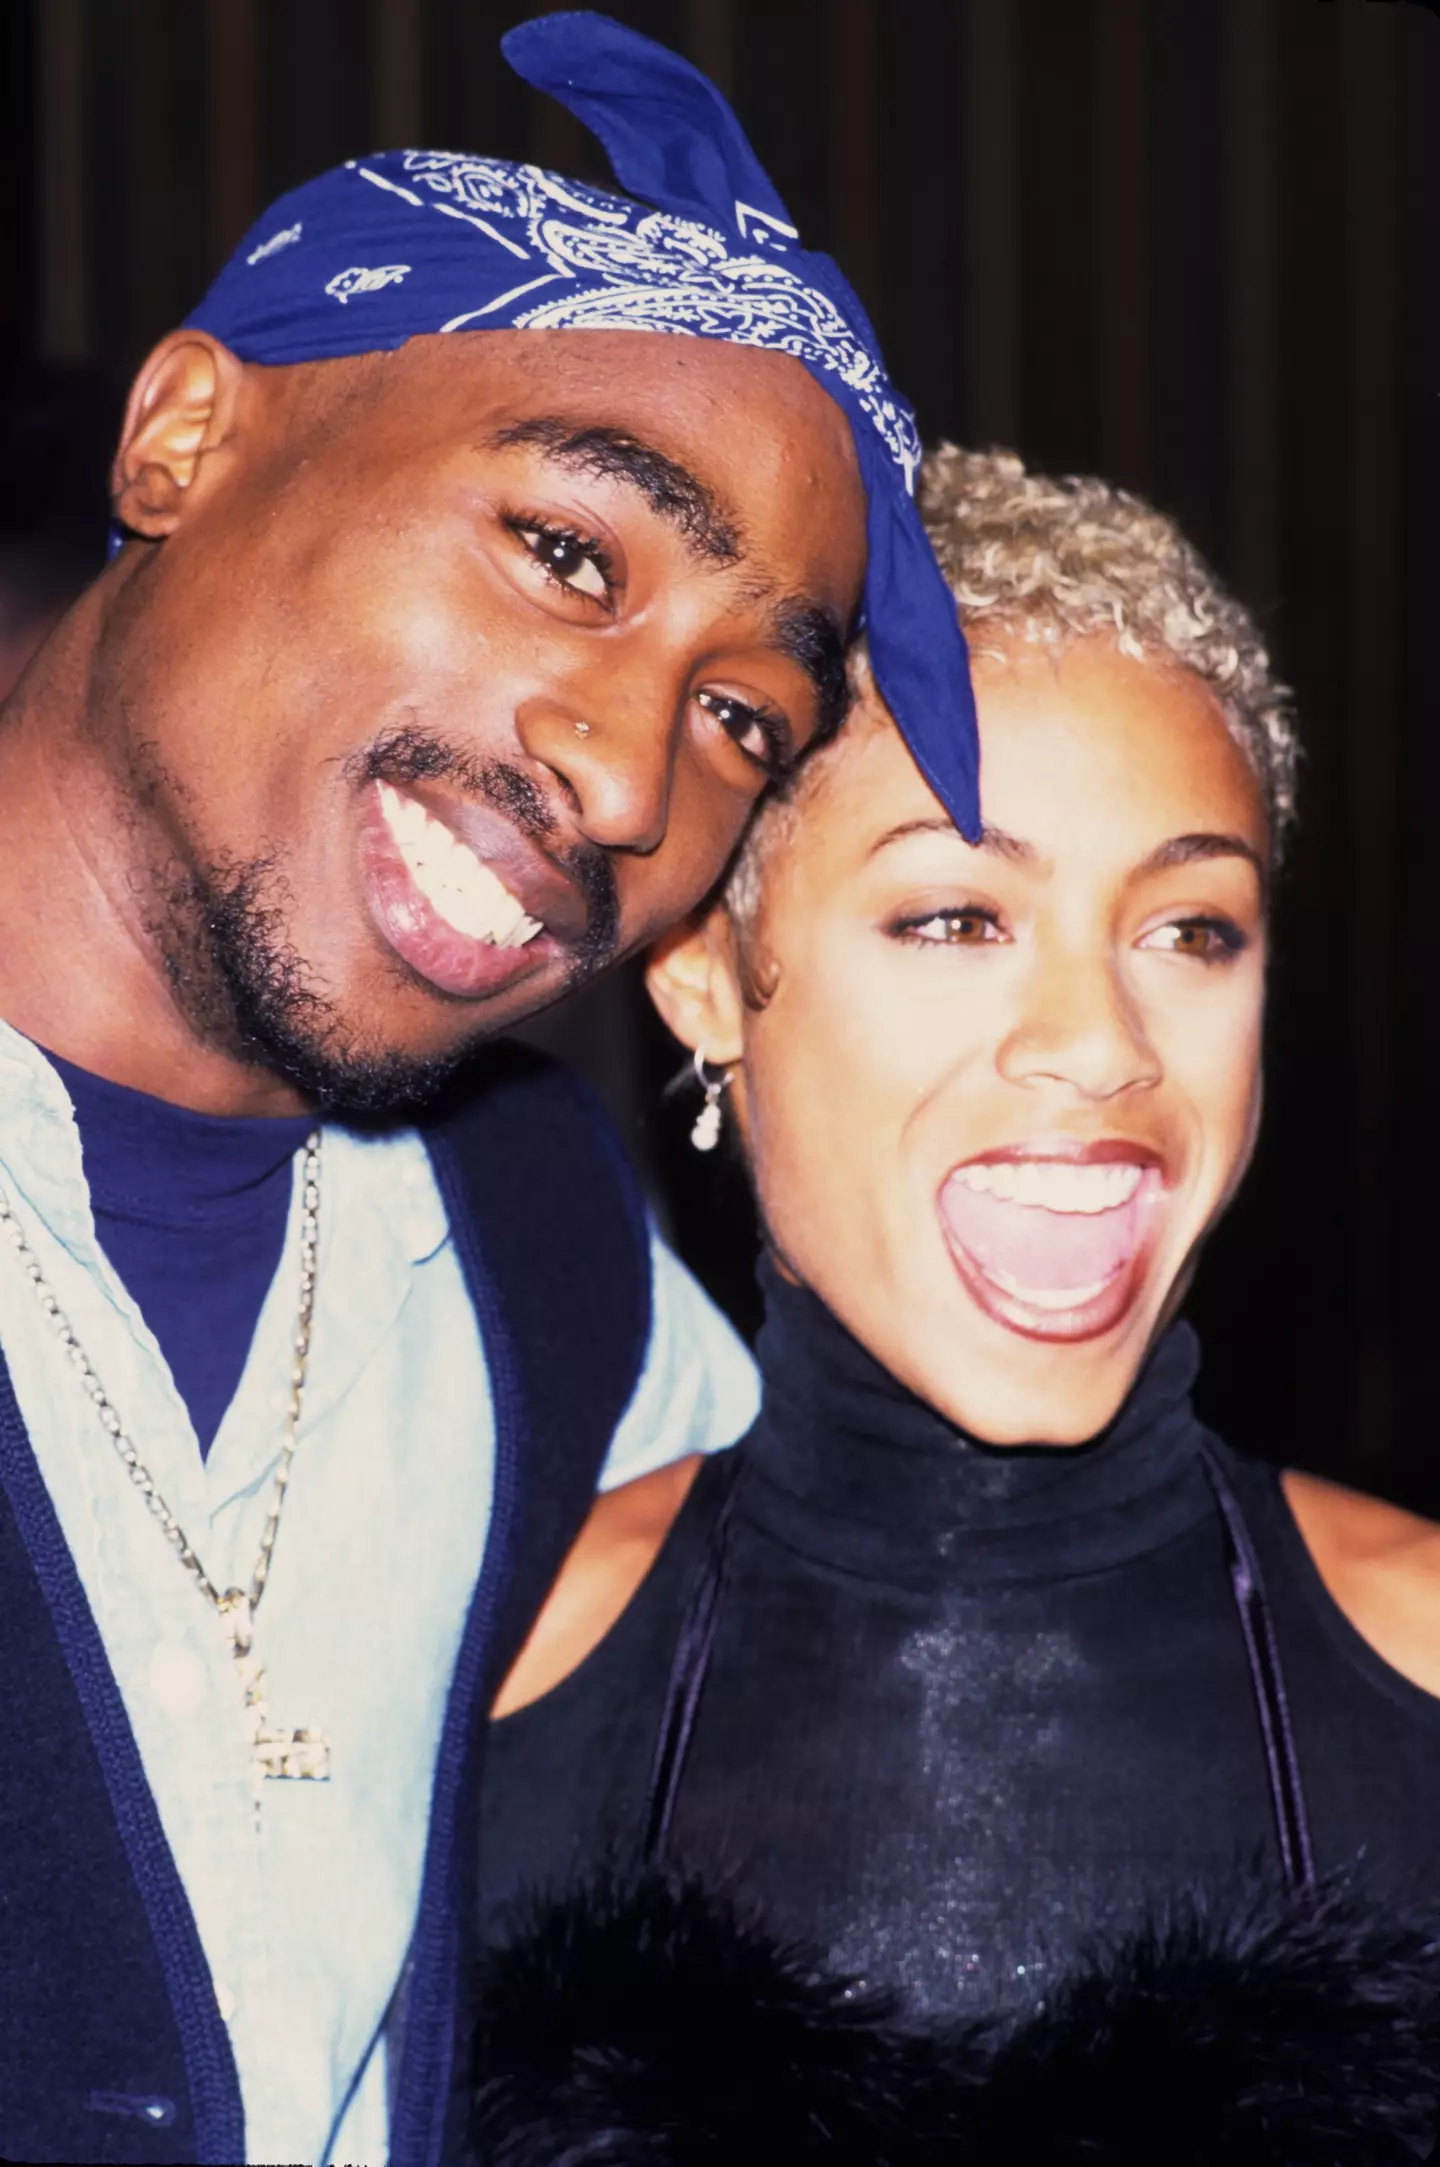 Pinkett Smith and Tupac in 1996, the year he was fatally shot.